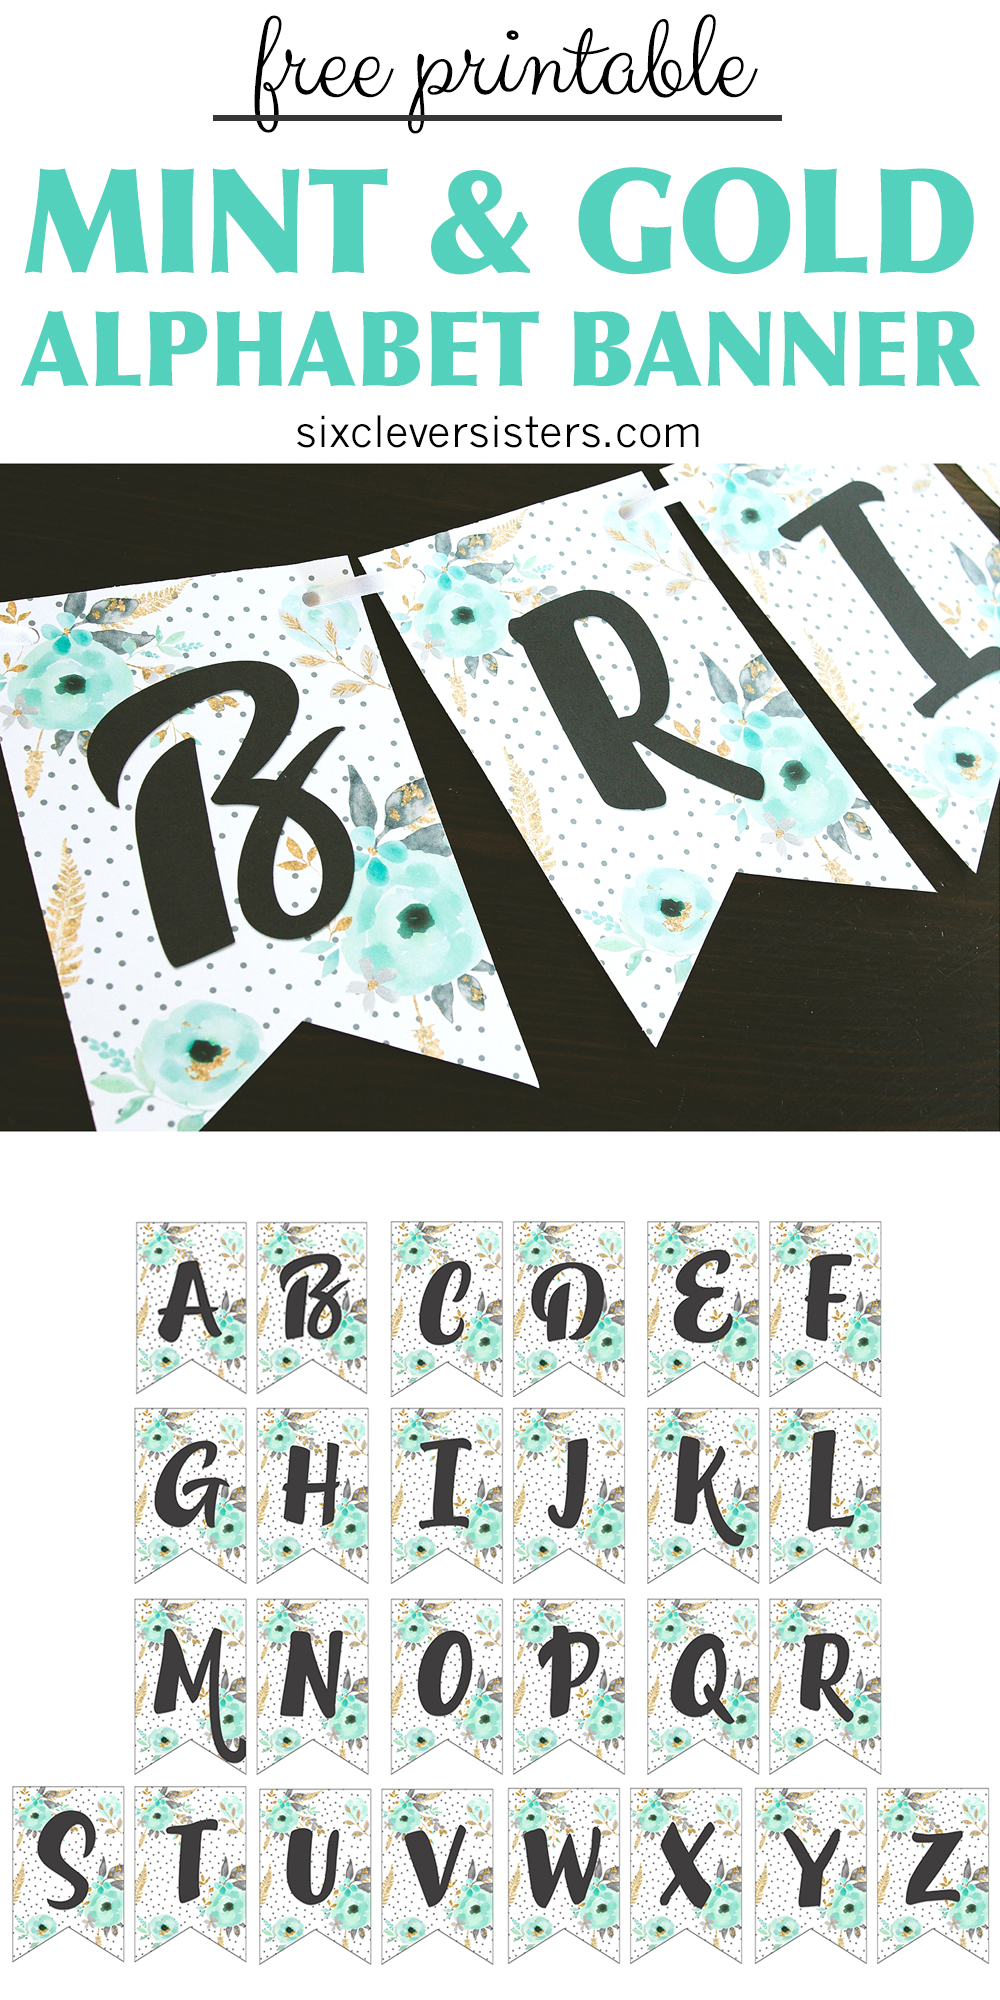 Free Printable Alphabet Banner MINT GOLD Six Clever Sisters